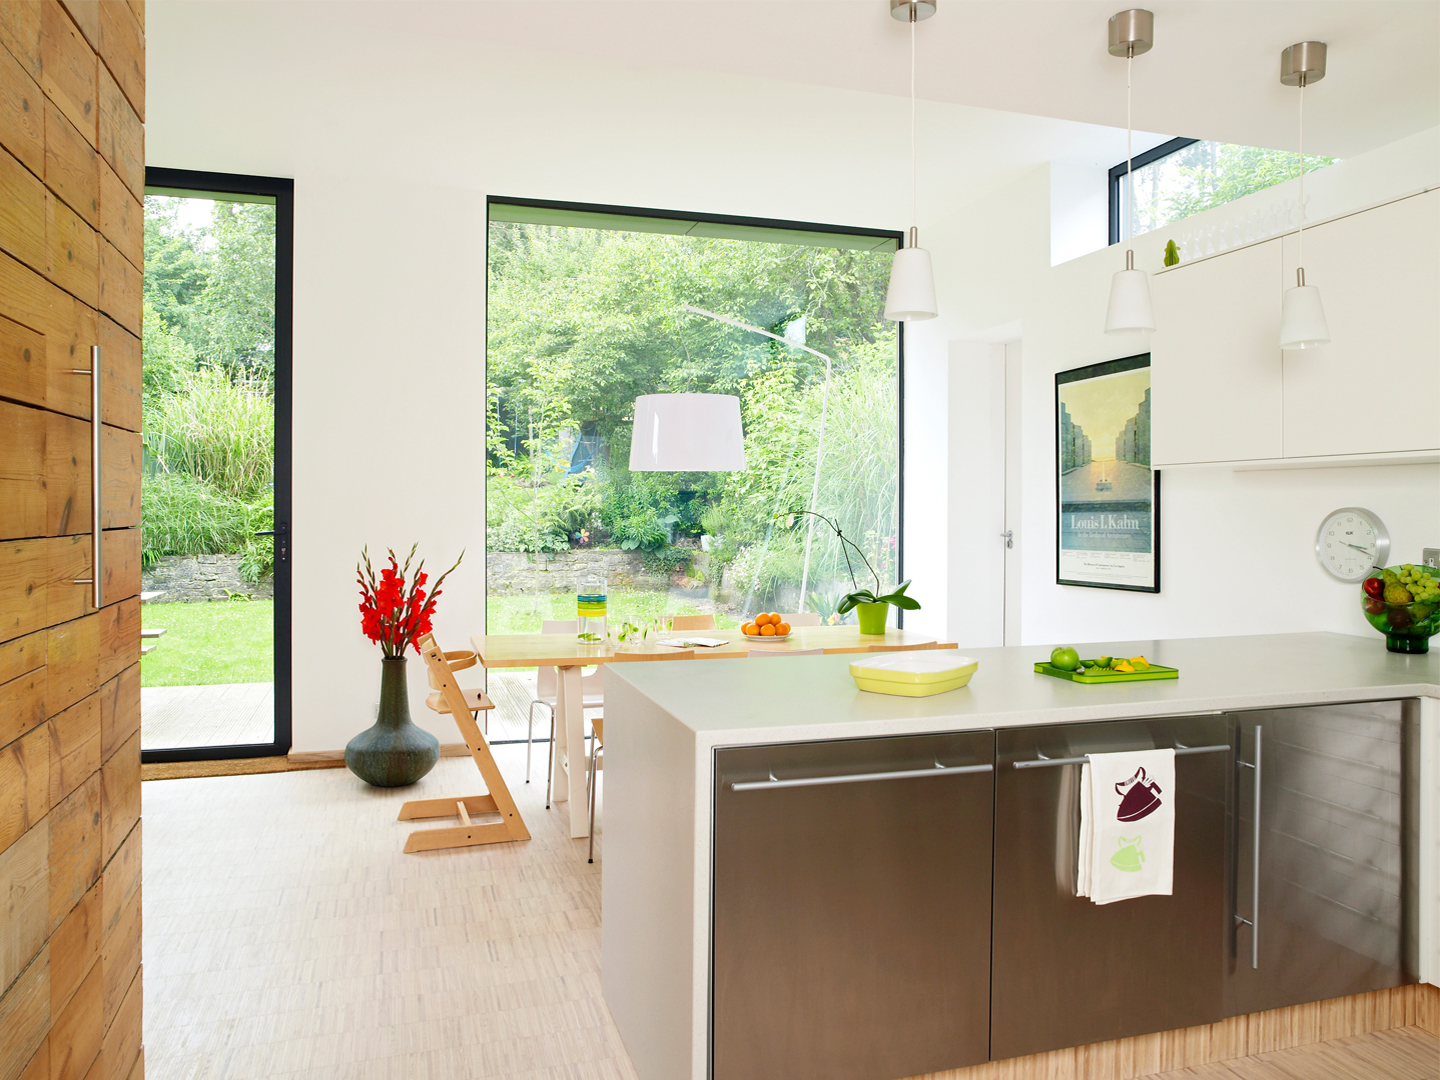 a view of a kitchen and dining area with huge 3 meter tall windows looking out into the garden